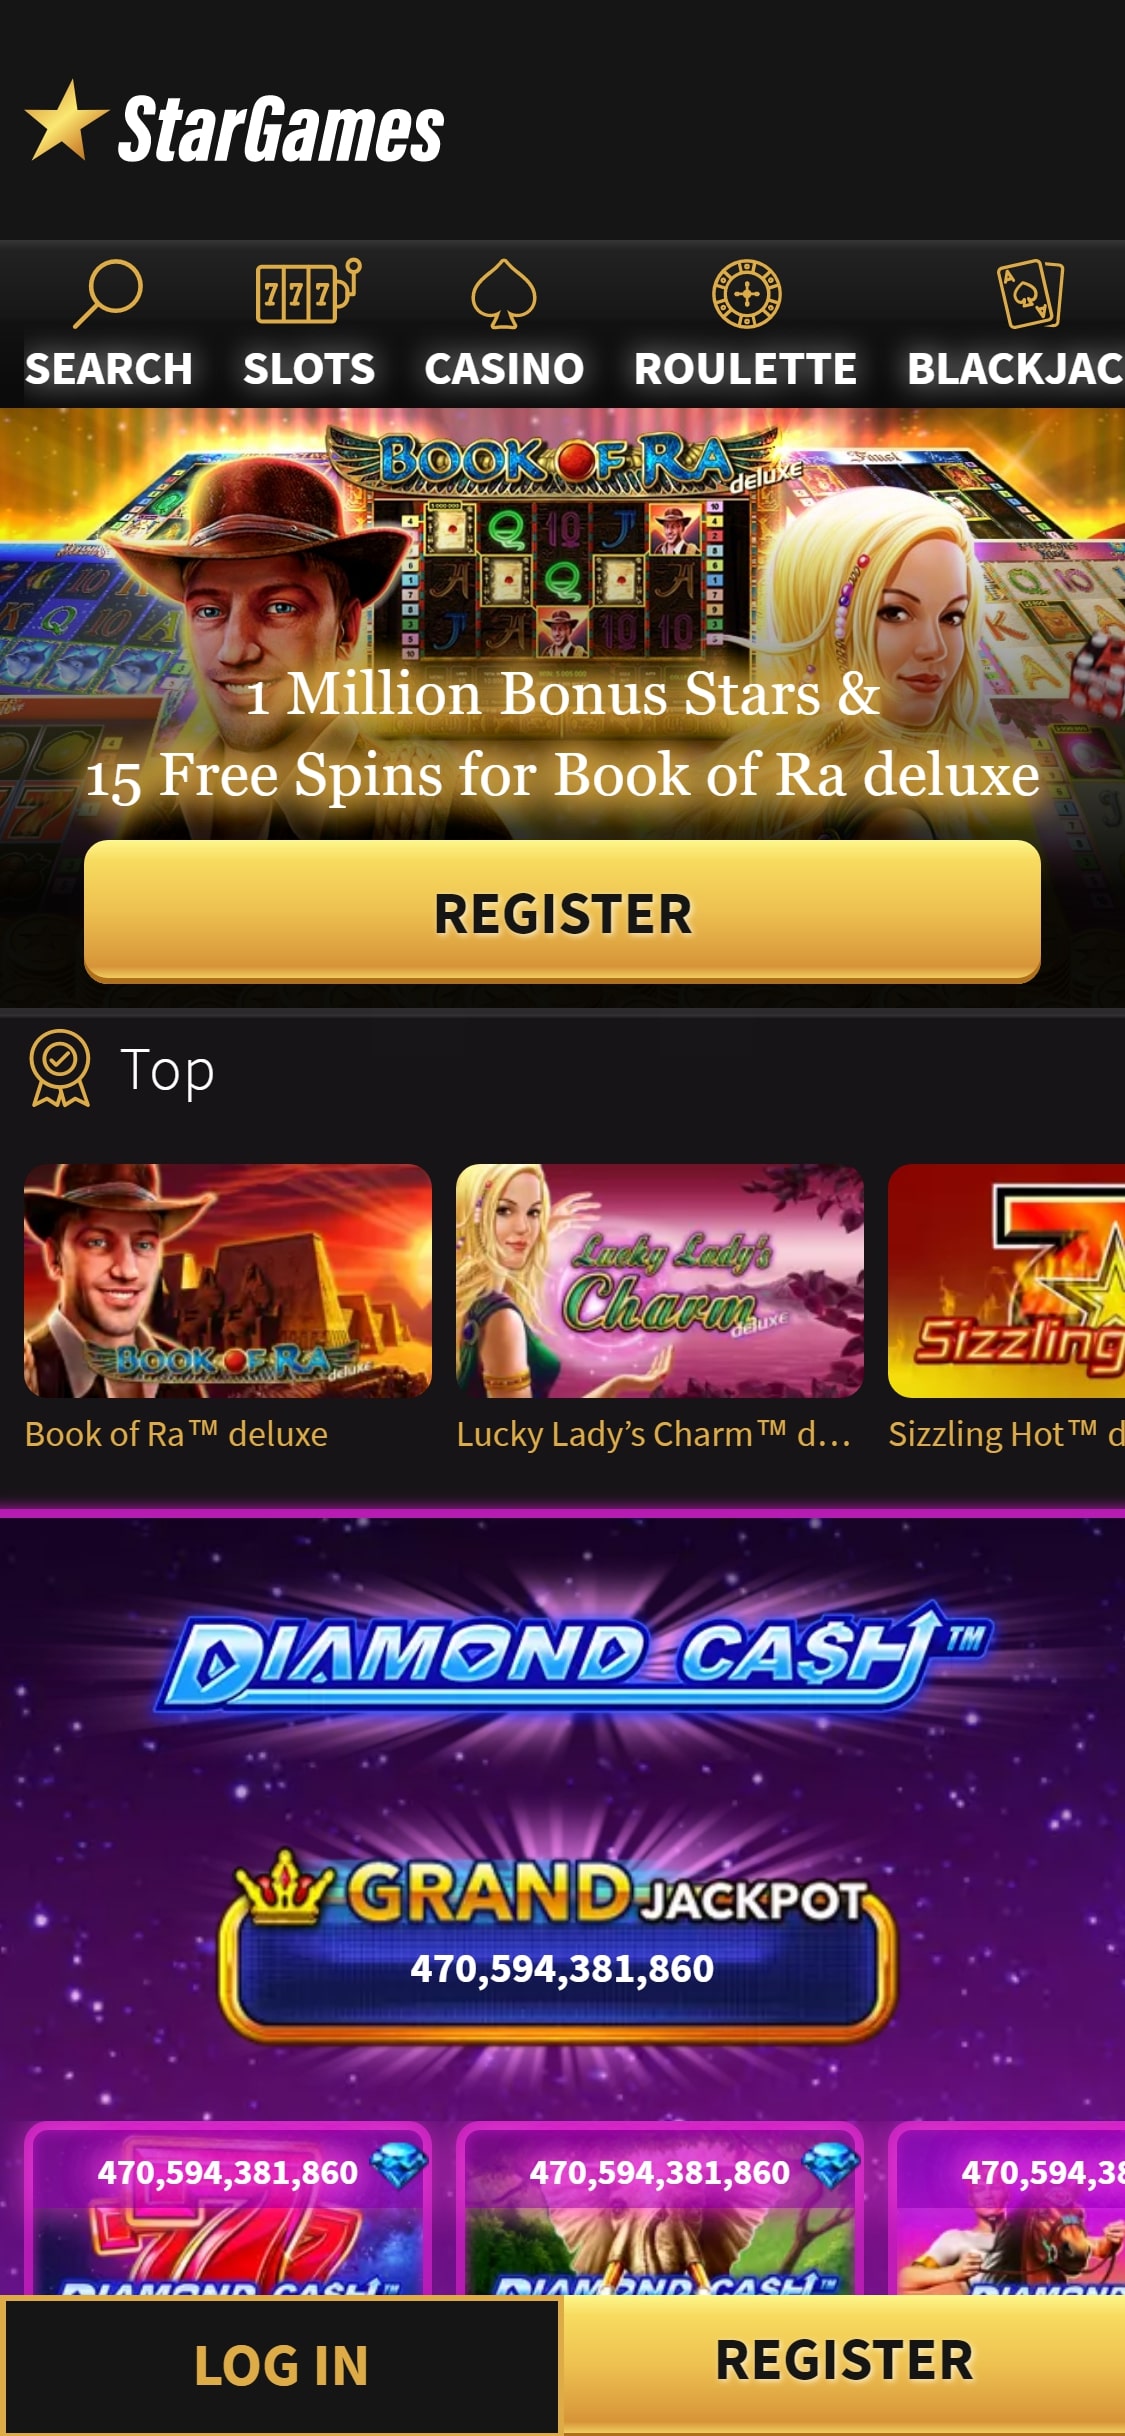 Star Games Casino Mobile Review